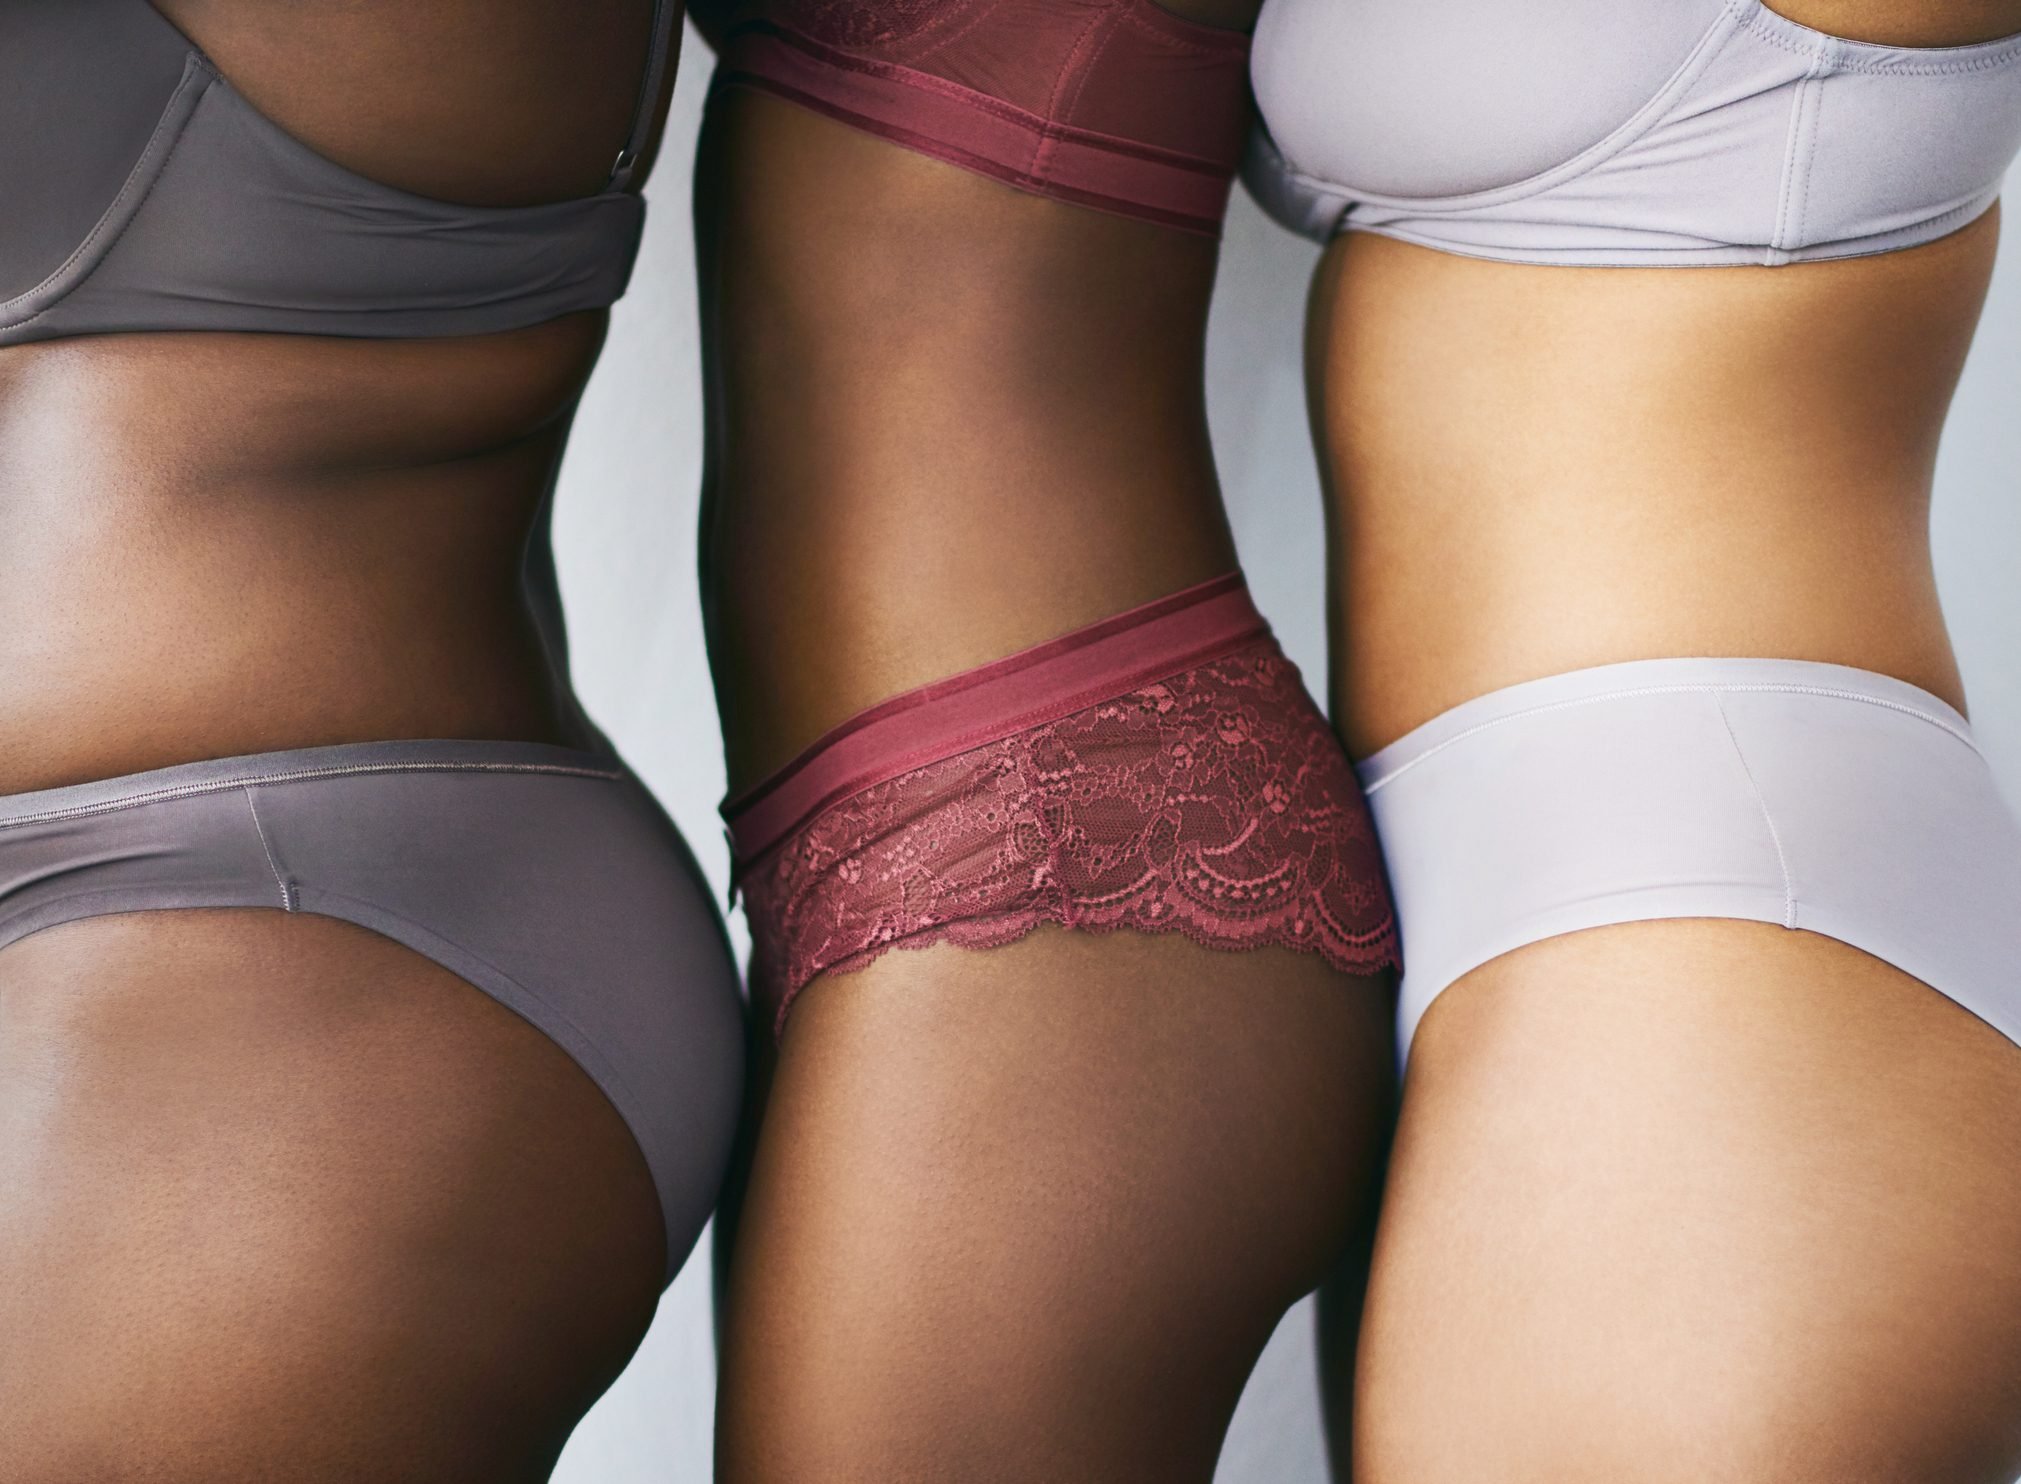 The Best Underwear Fabric to Avoid Yeast Infections – Magi